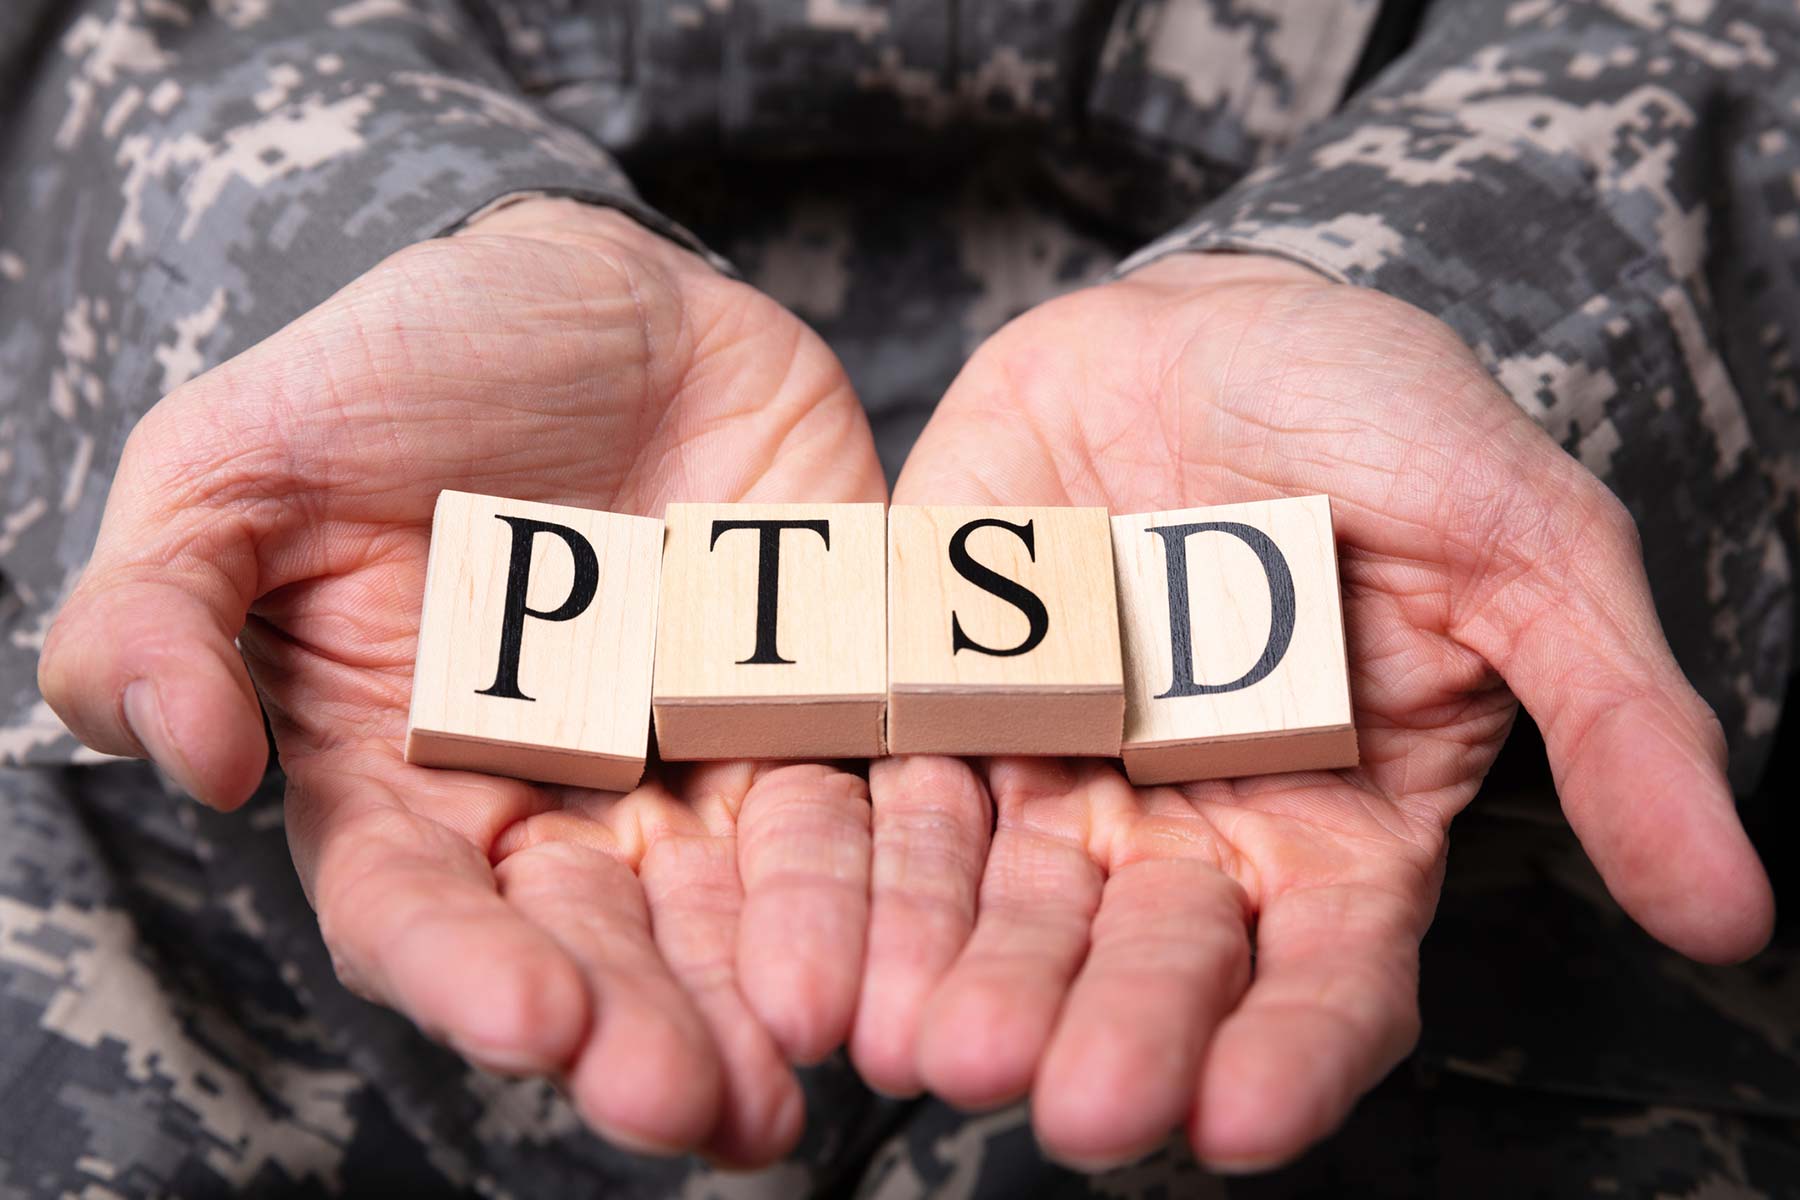 signs of ptsd from childhood trauma